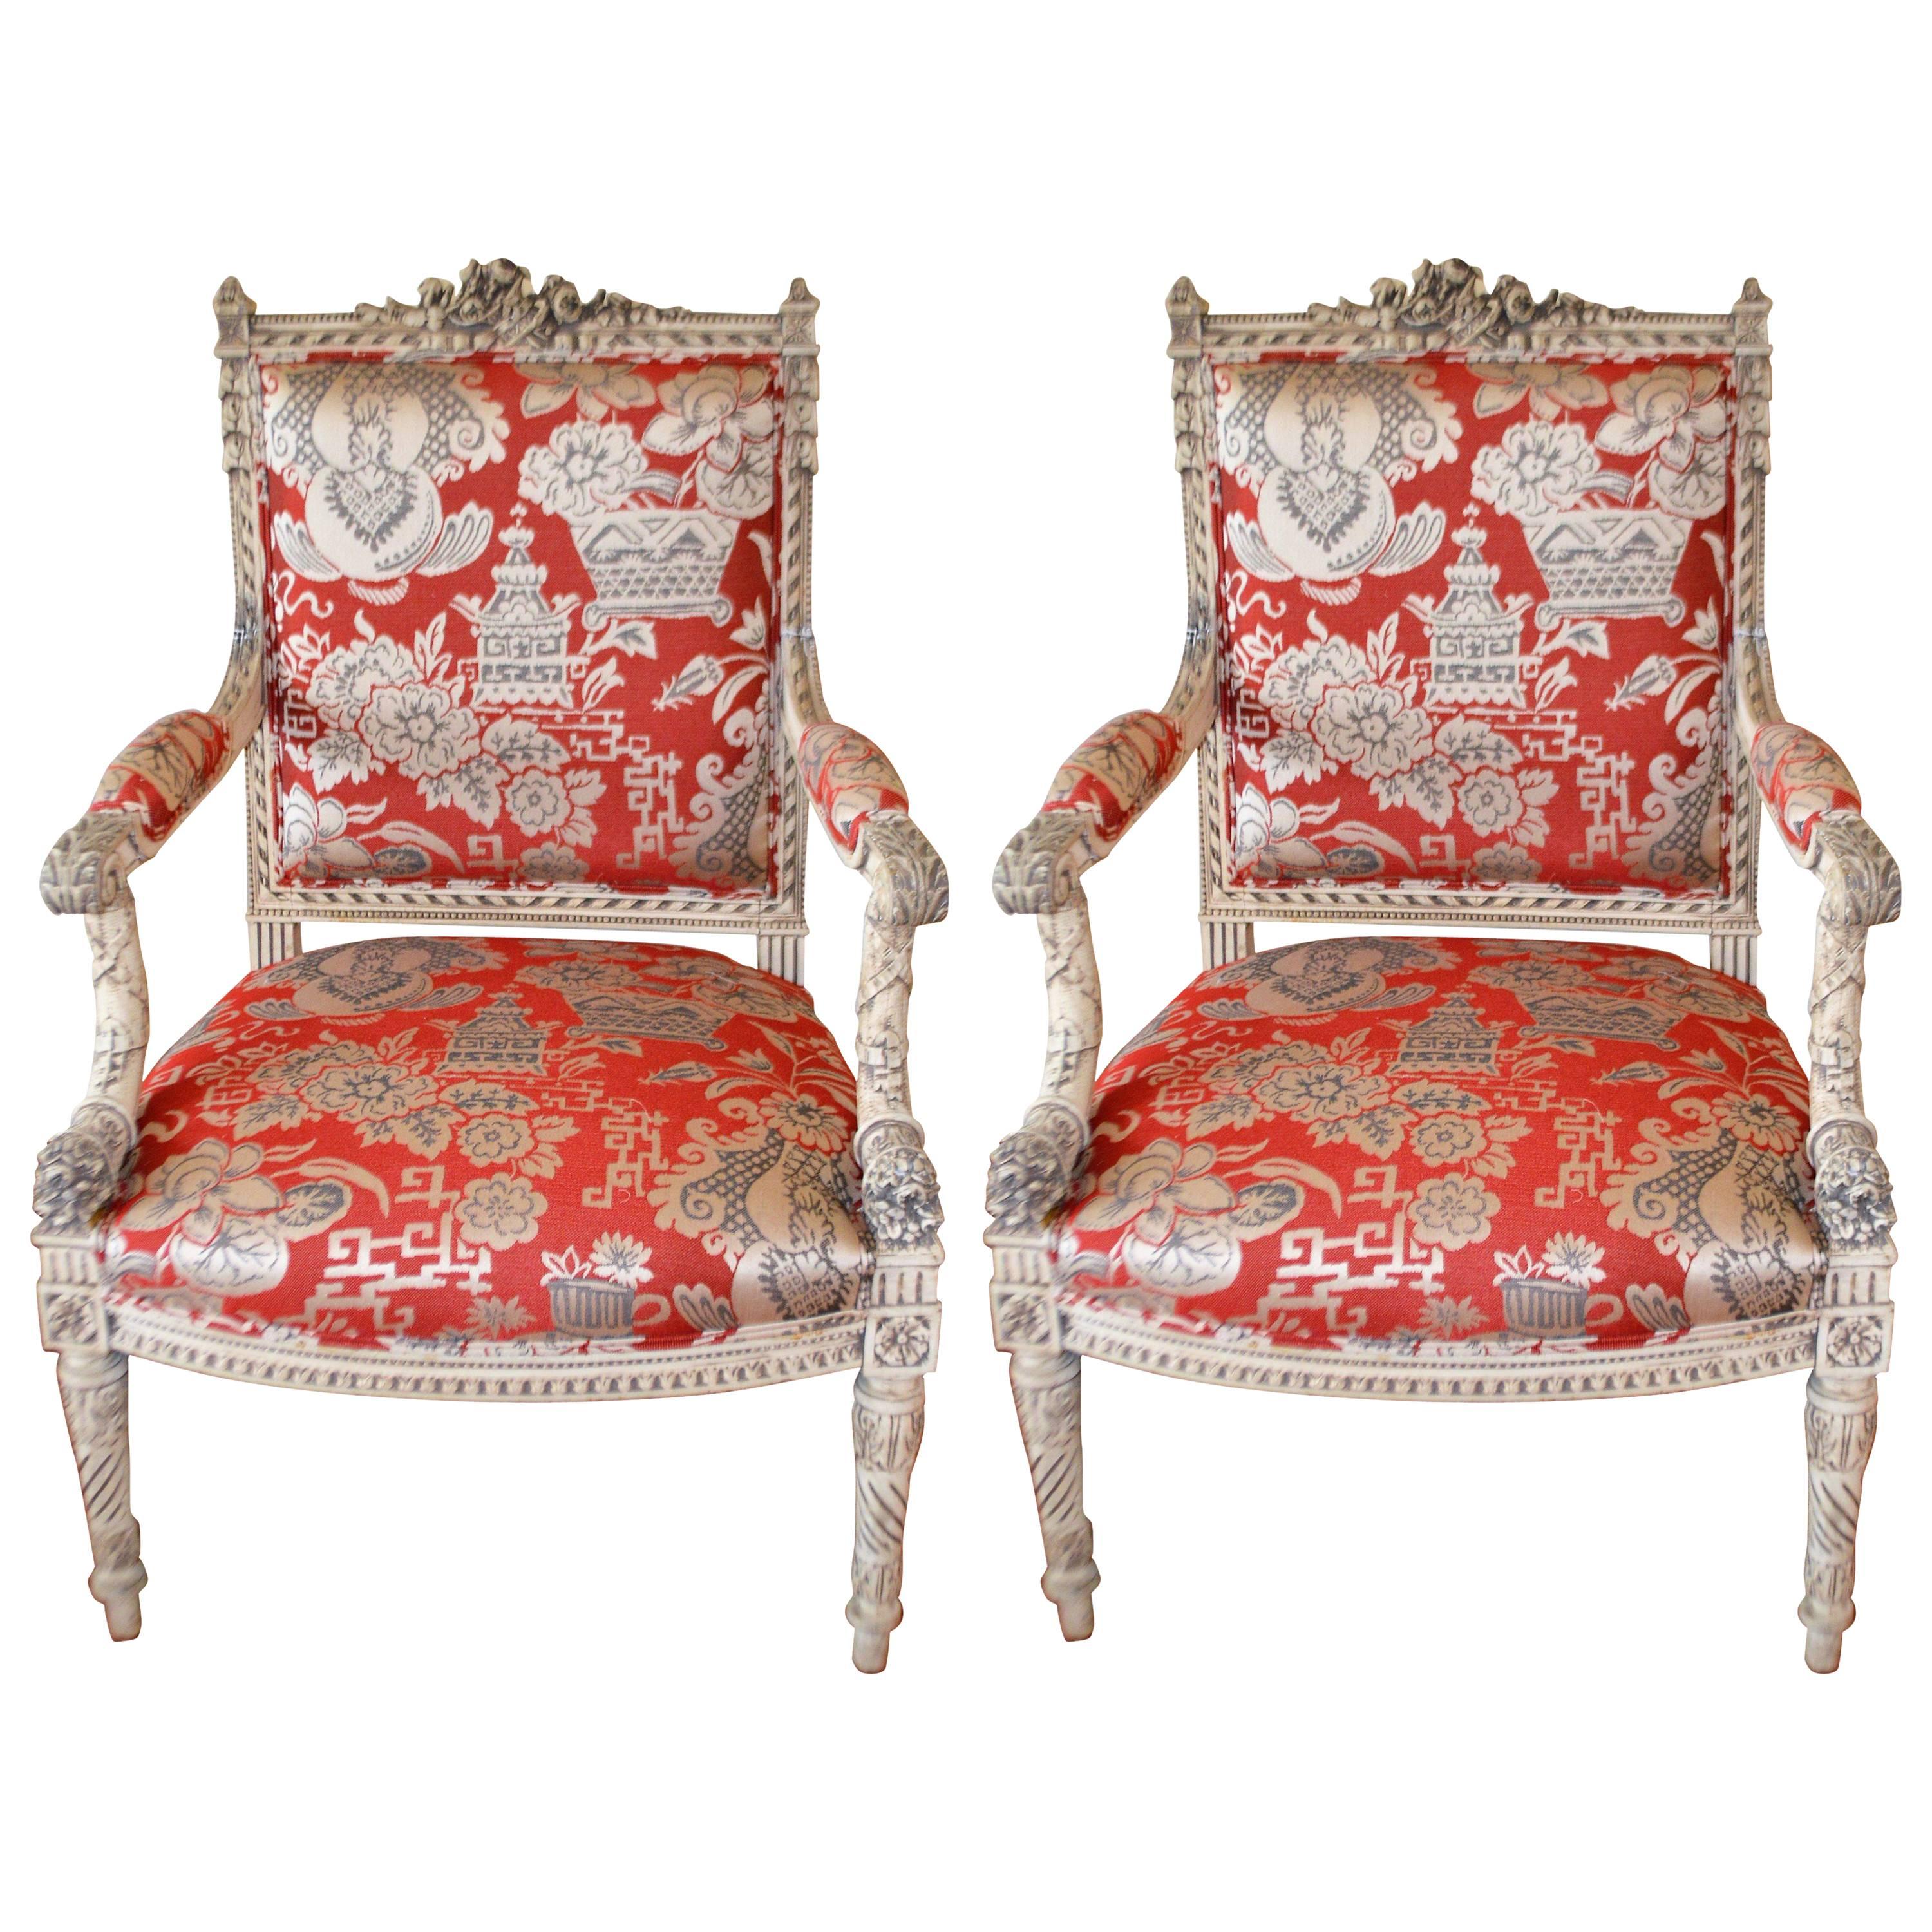 Pair of 19th Century Hand-Carved Armchair New Upholstery in Chinoiserie Fabric